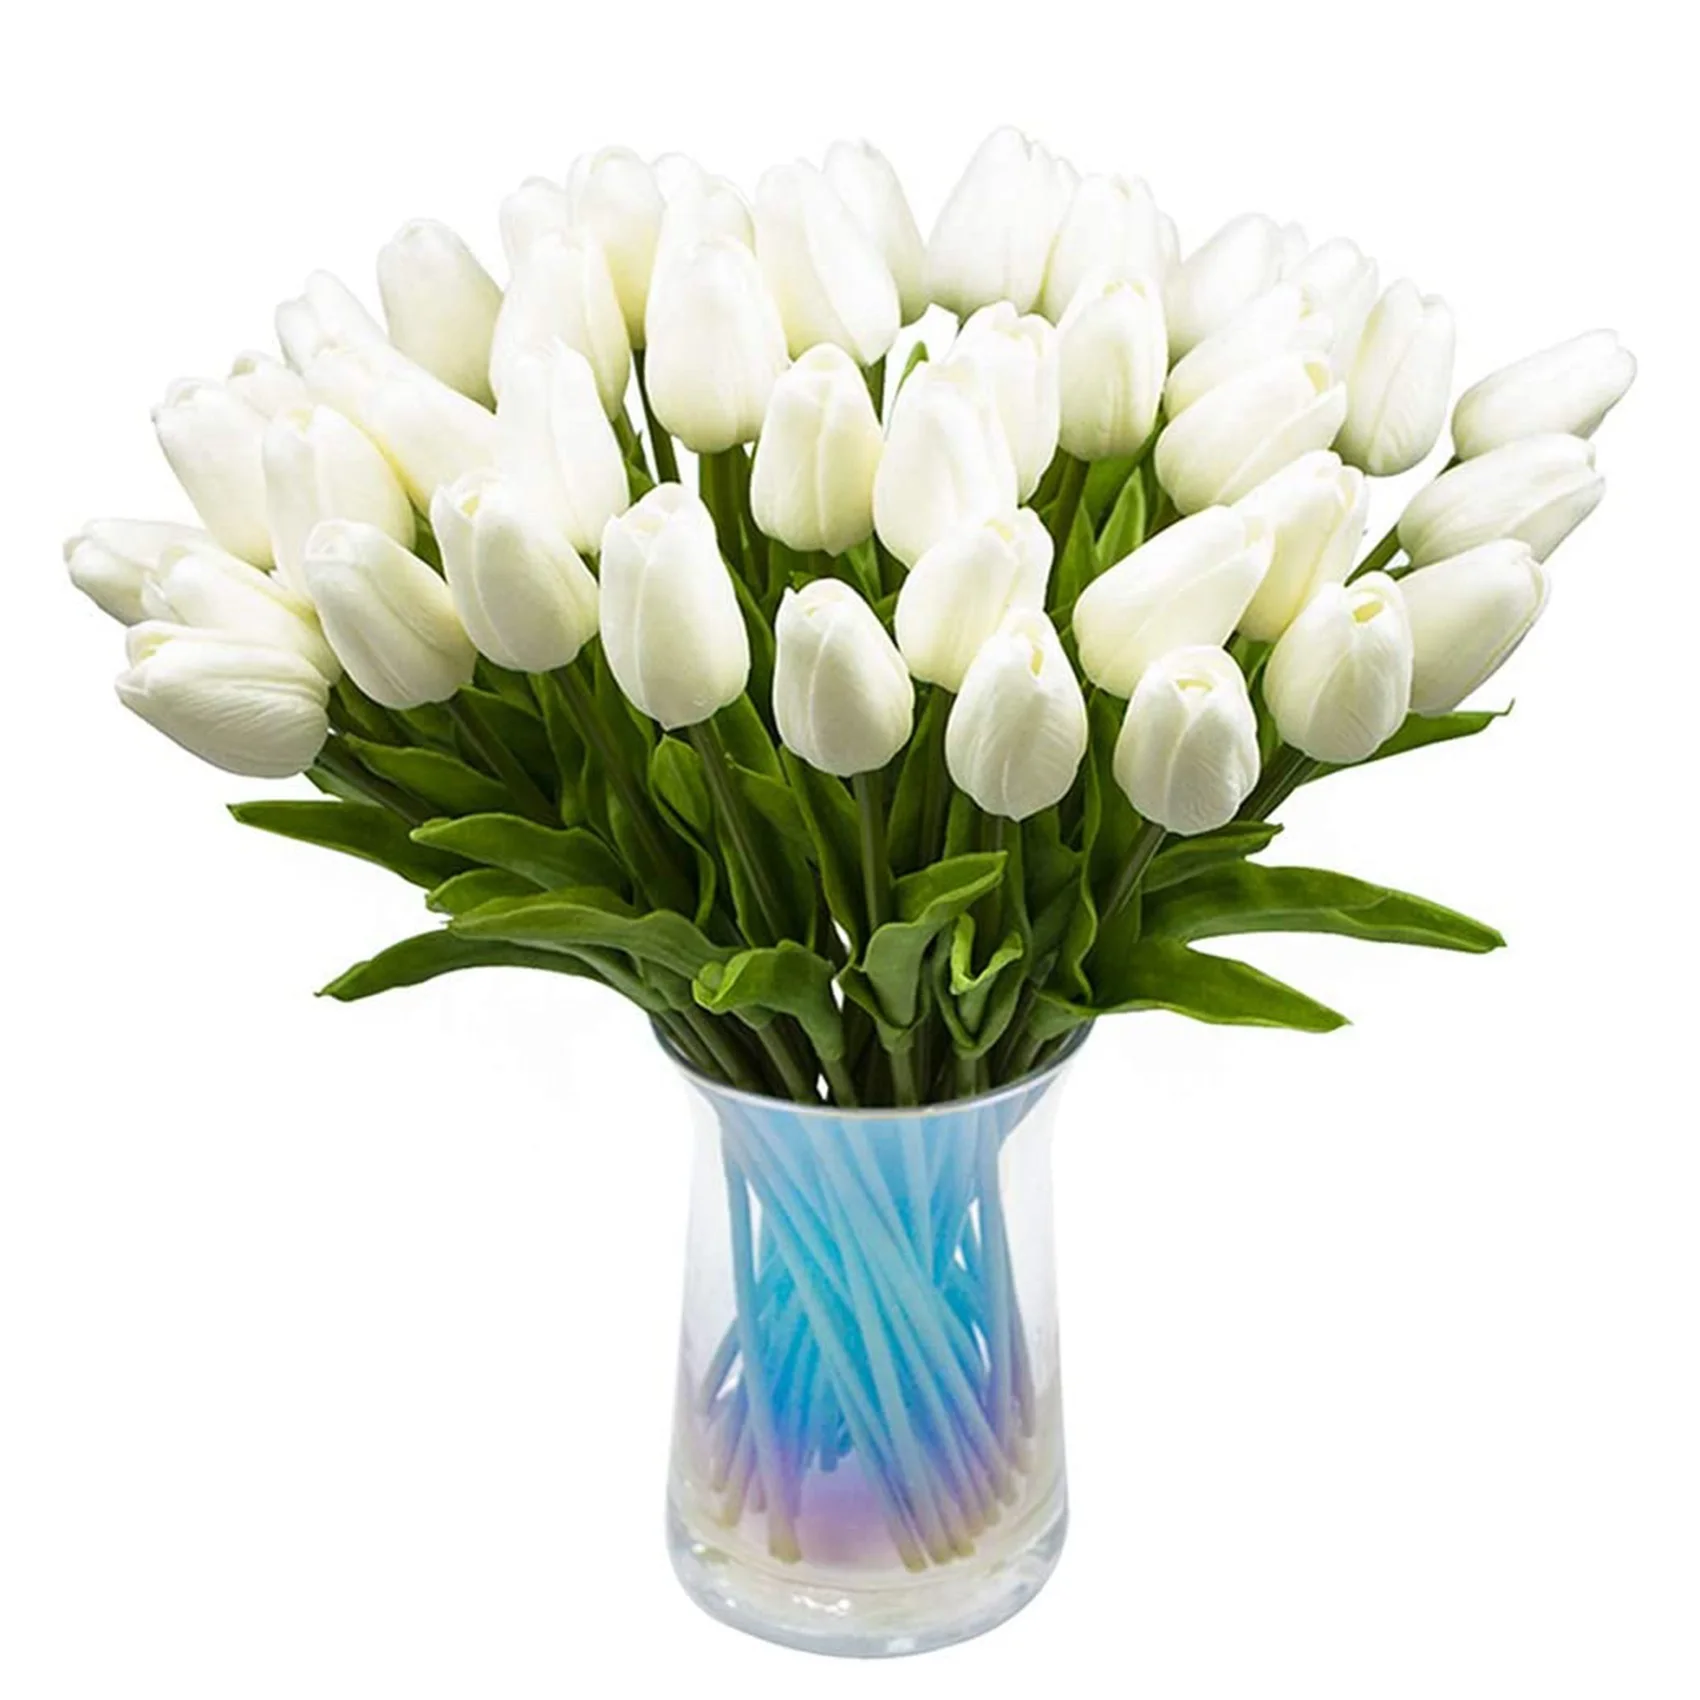 

30Pcs Artificial Tulips Flowers Real Touch Tulips Fake Holland PU Tulip Bouquet Latex Flower White Tulip(White)